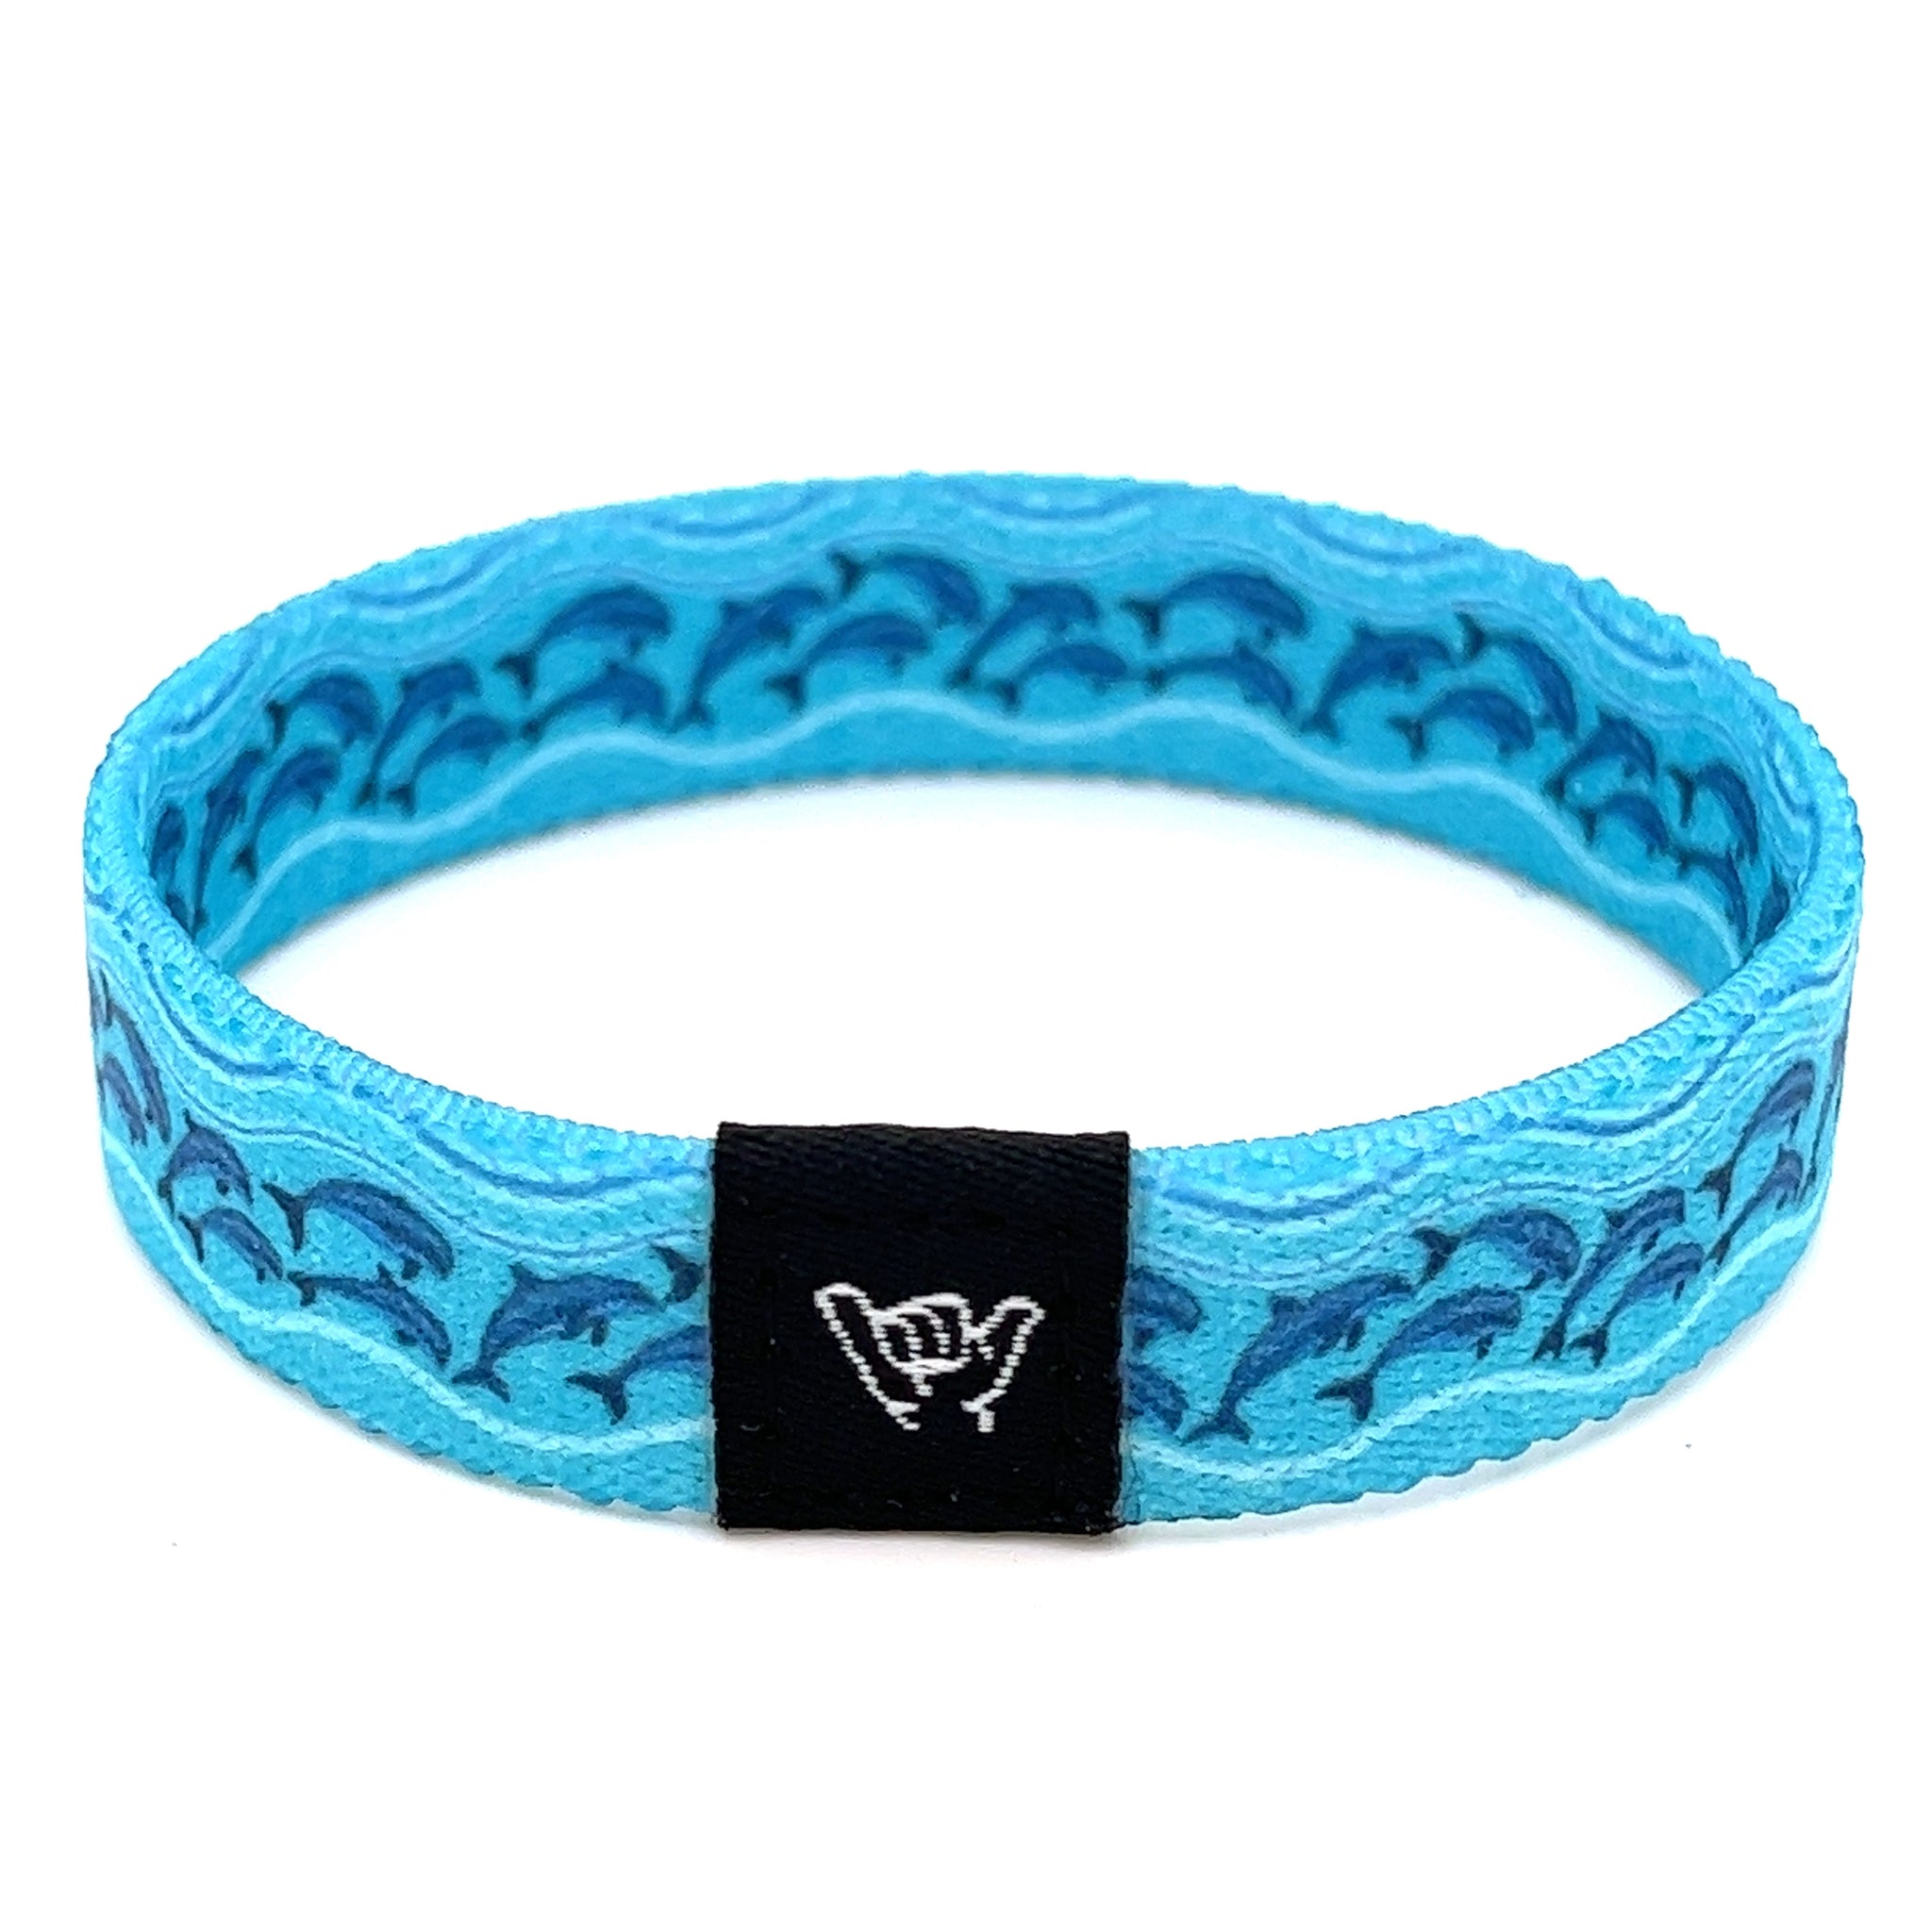 School Hang Dolphins – Loose of Bands Bracelet Wristband